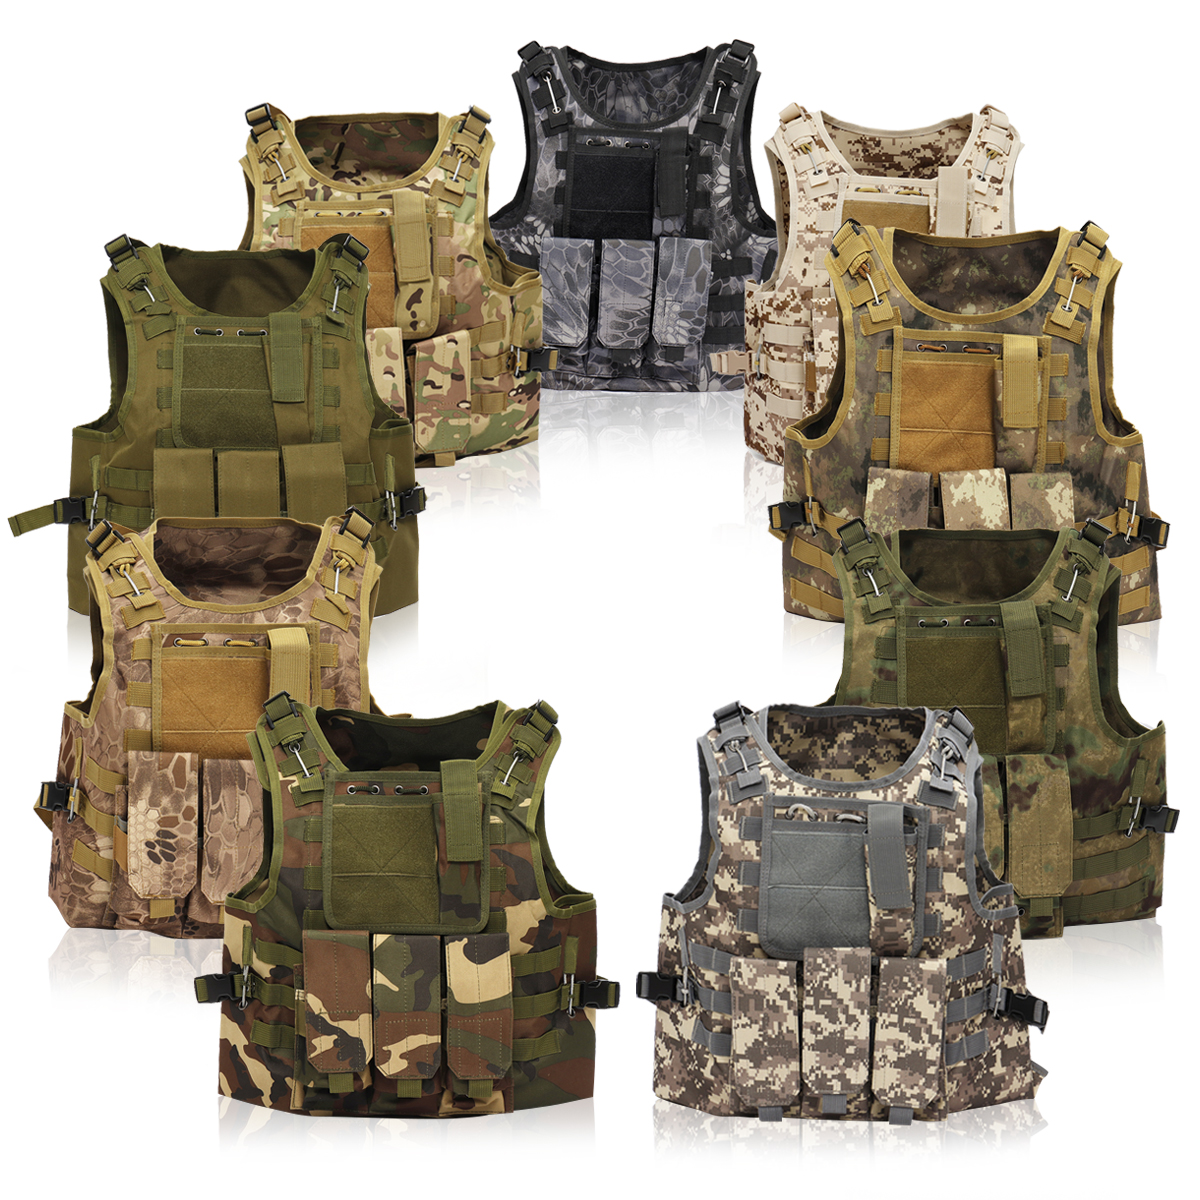 Outdoor-Tactical-Military-Vest-Sports-Hunting-Hiking-Climbing-Plate-Carrier-Paintball-Combat-Vest-1431934-2